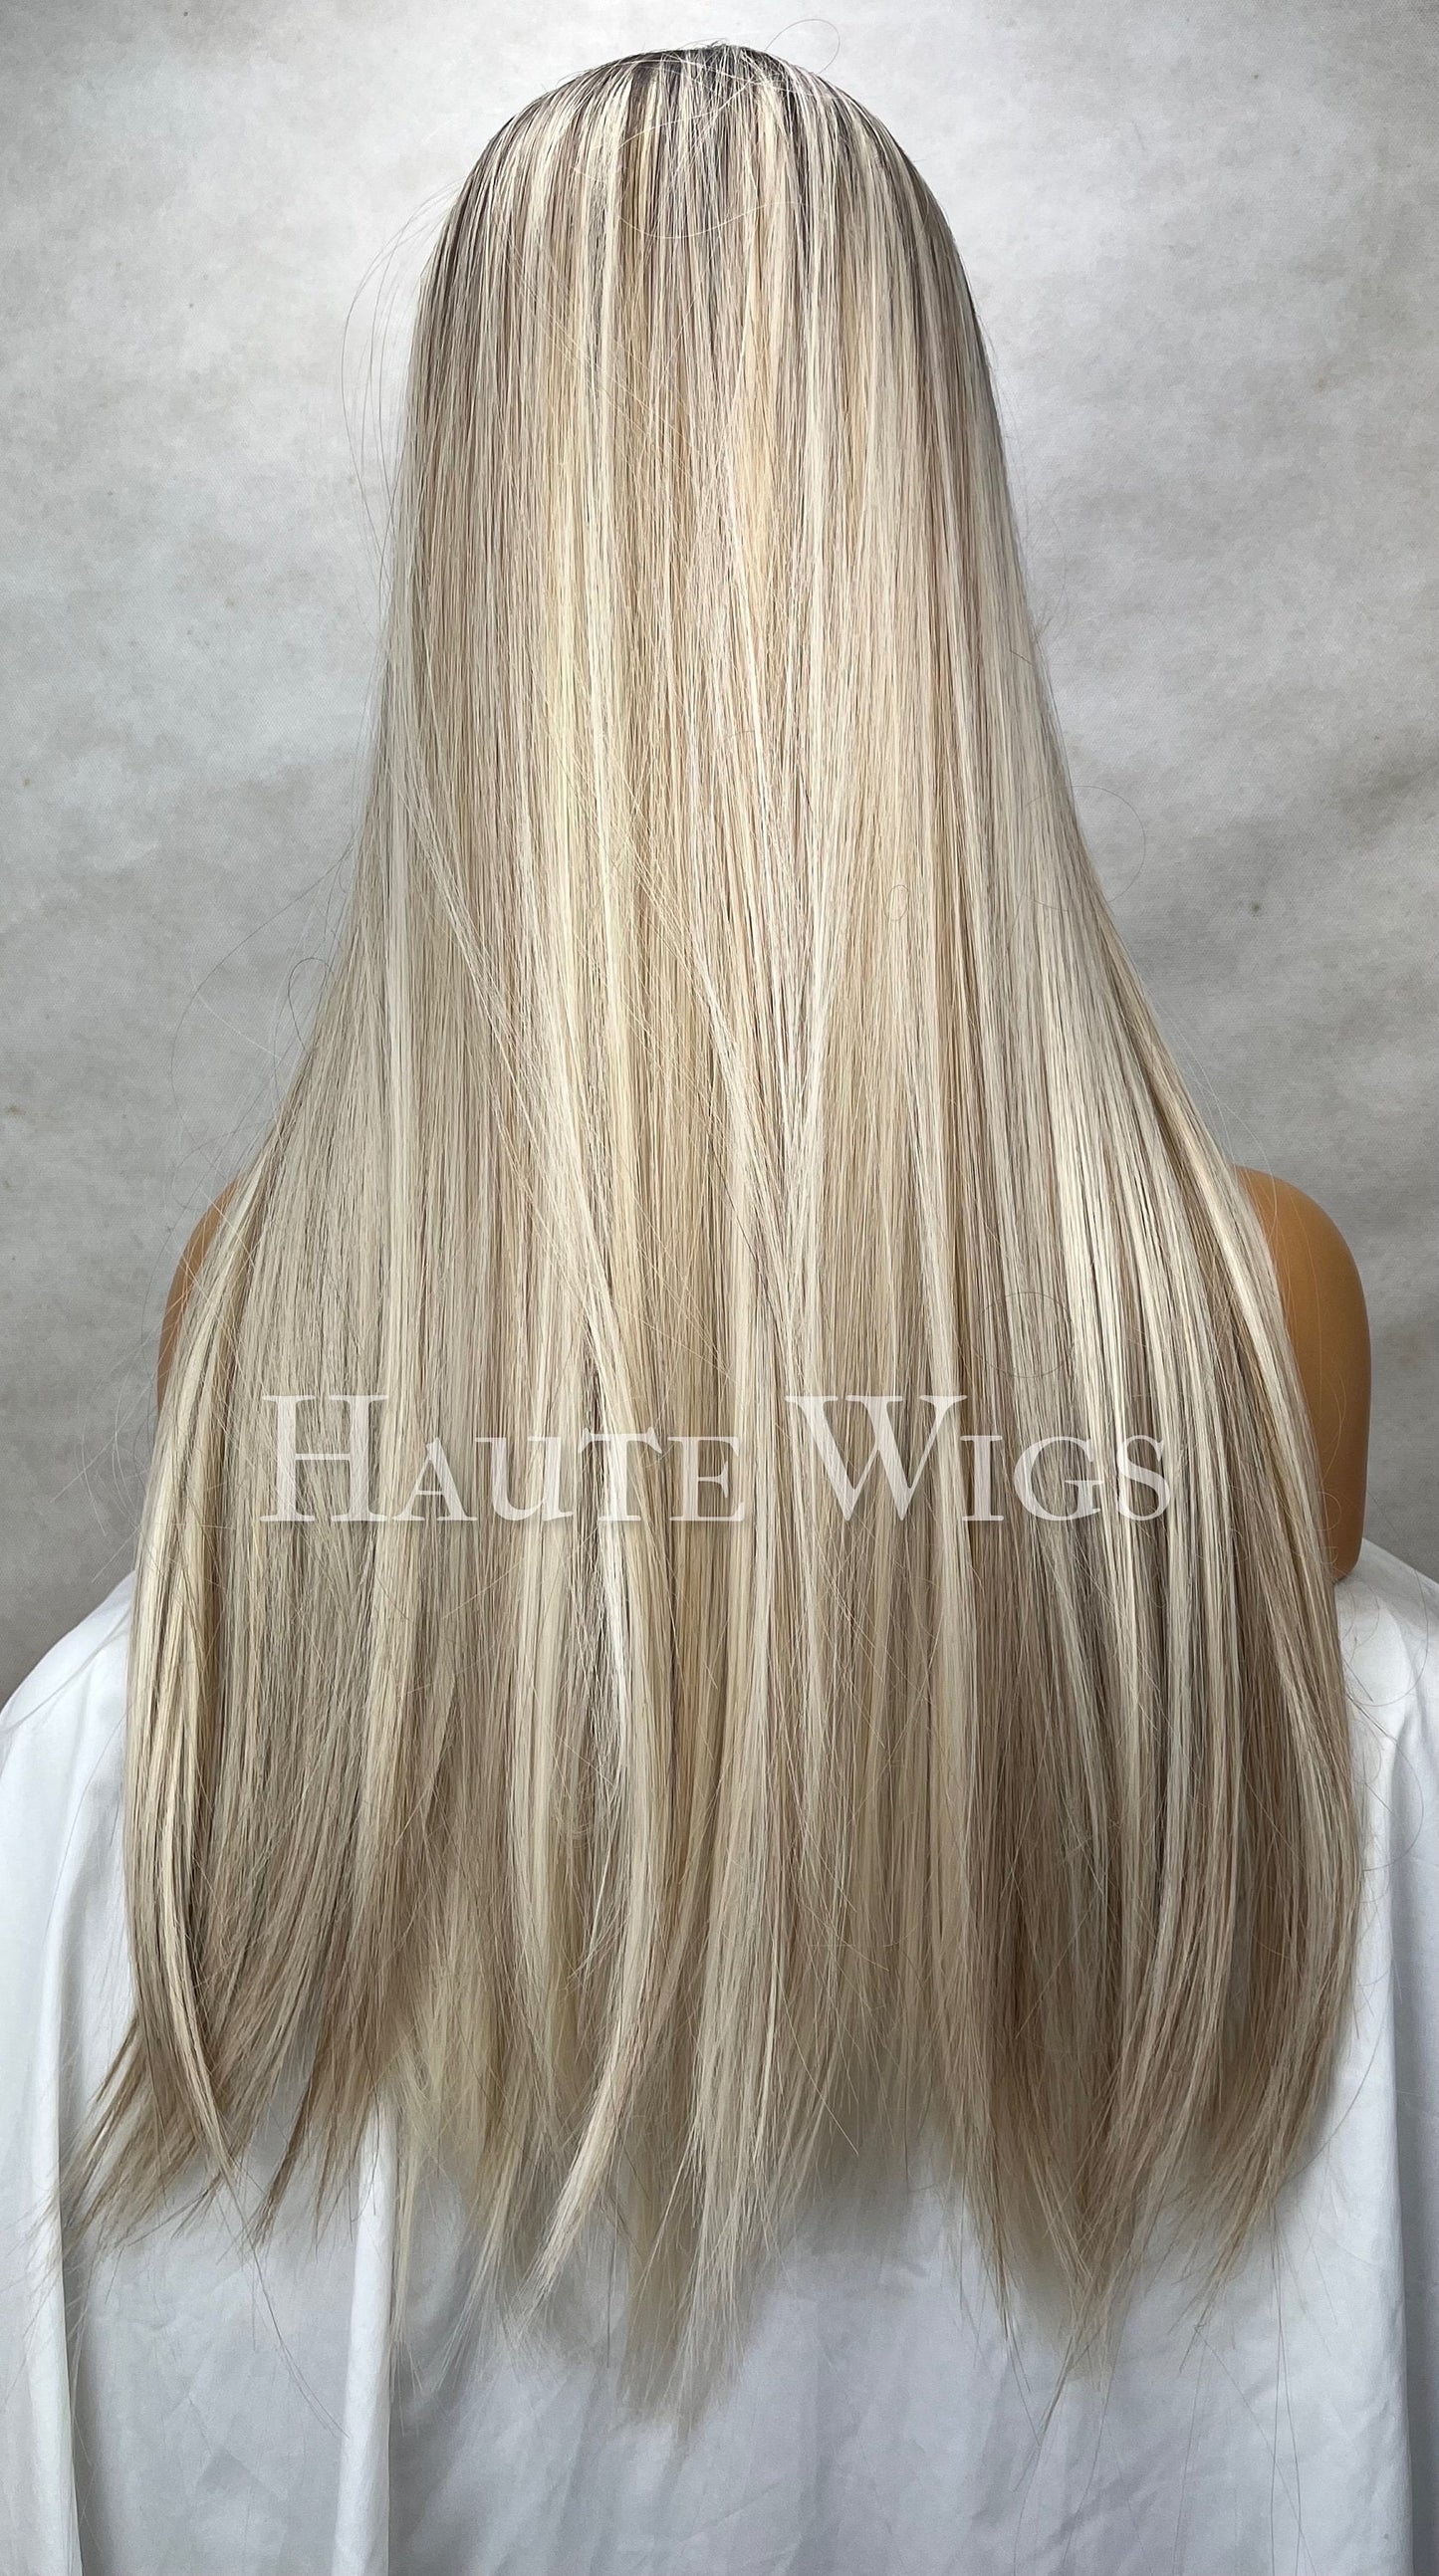 Crystal - Blonde With Dark Brown Roots Balayage Highlights 20 Inch Wig Straight Layered NO Lace Front bangs Wig Gift for her